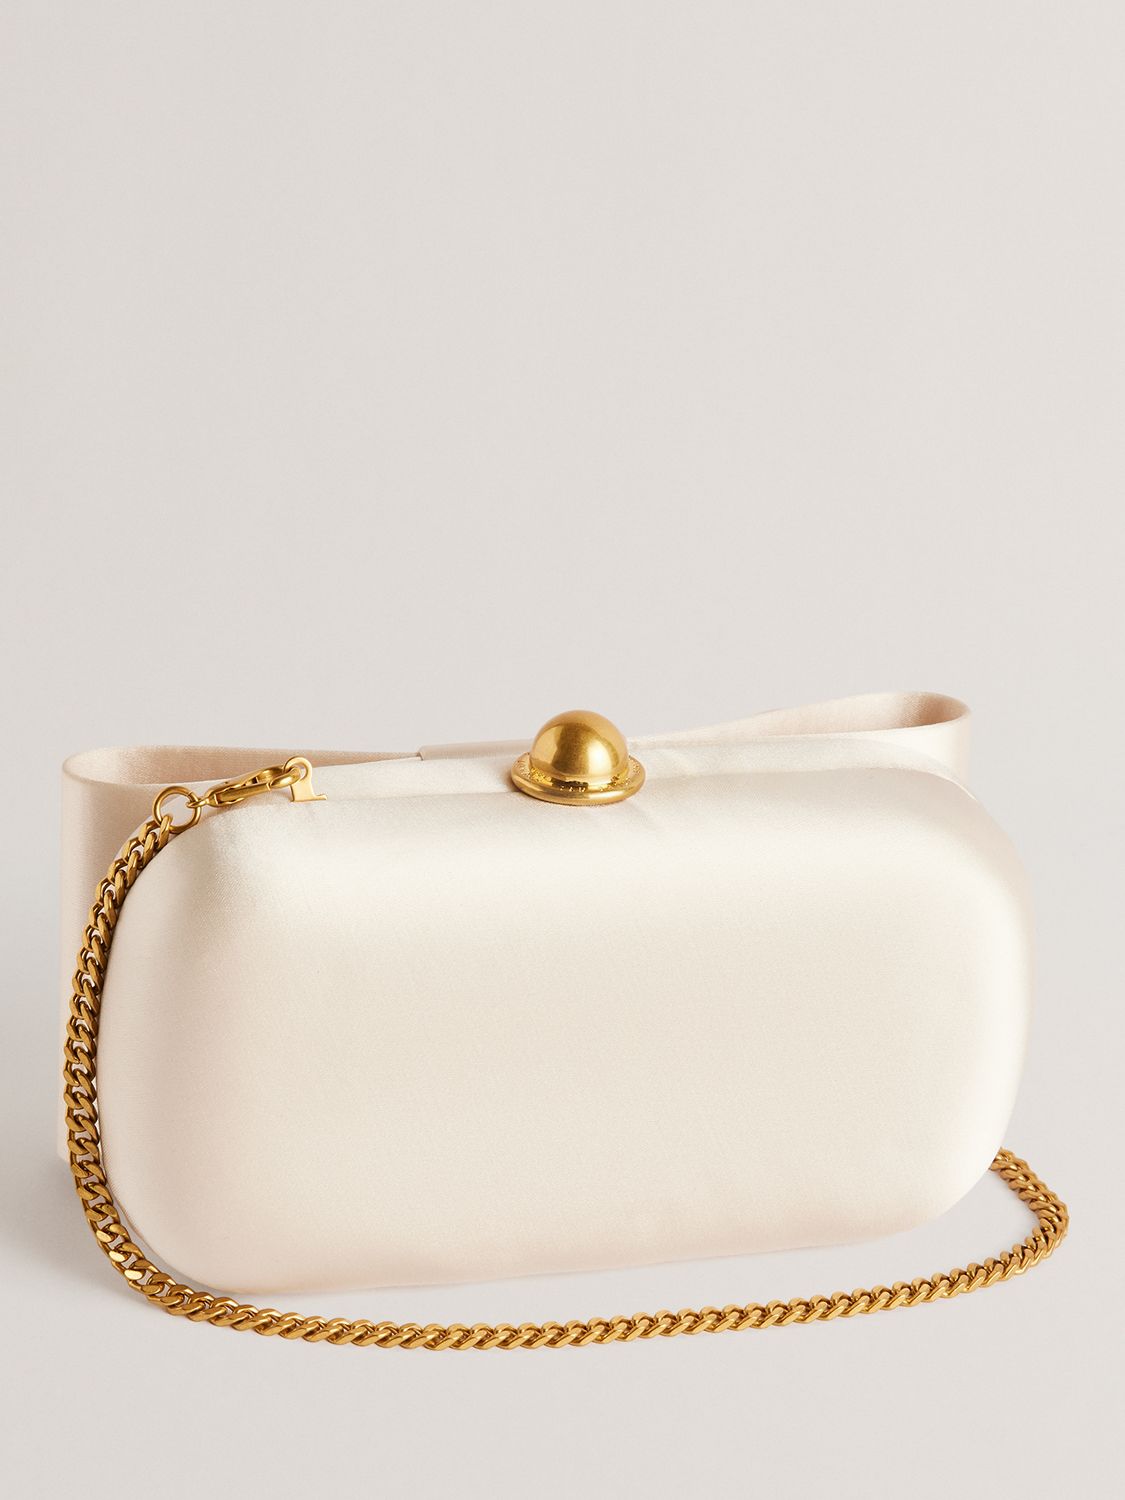 Ted Baker Bowelaa Satin Bow Clutch Bag, Ivory, One Size